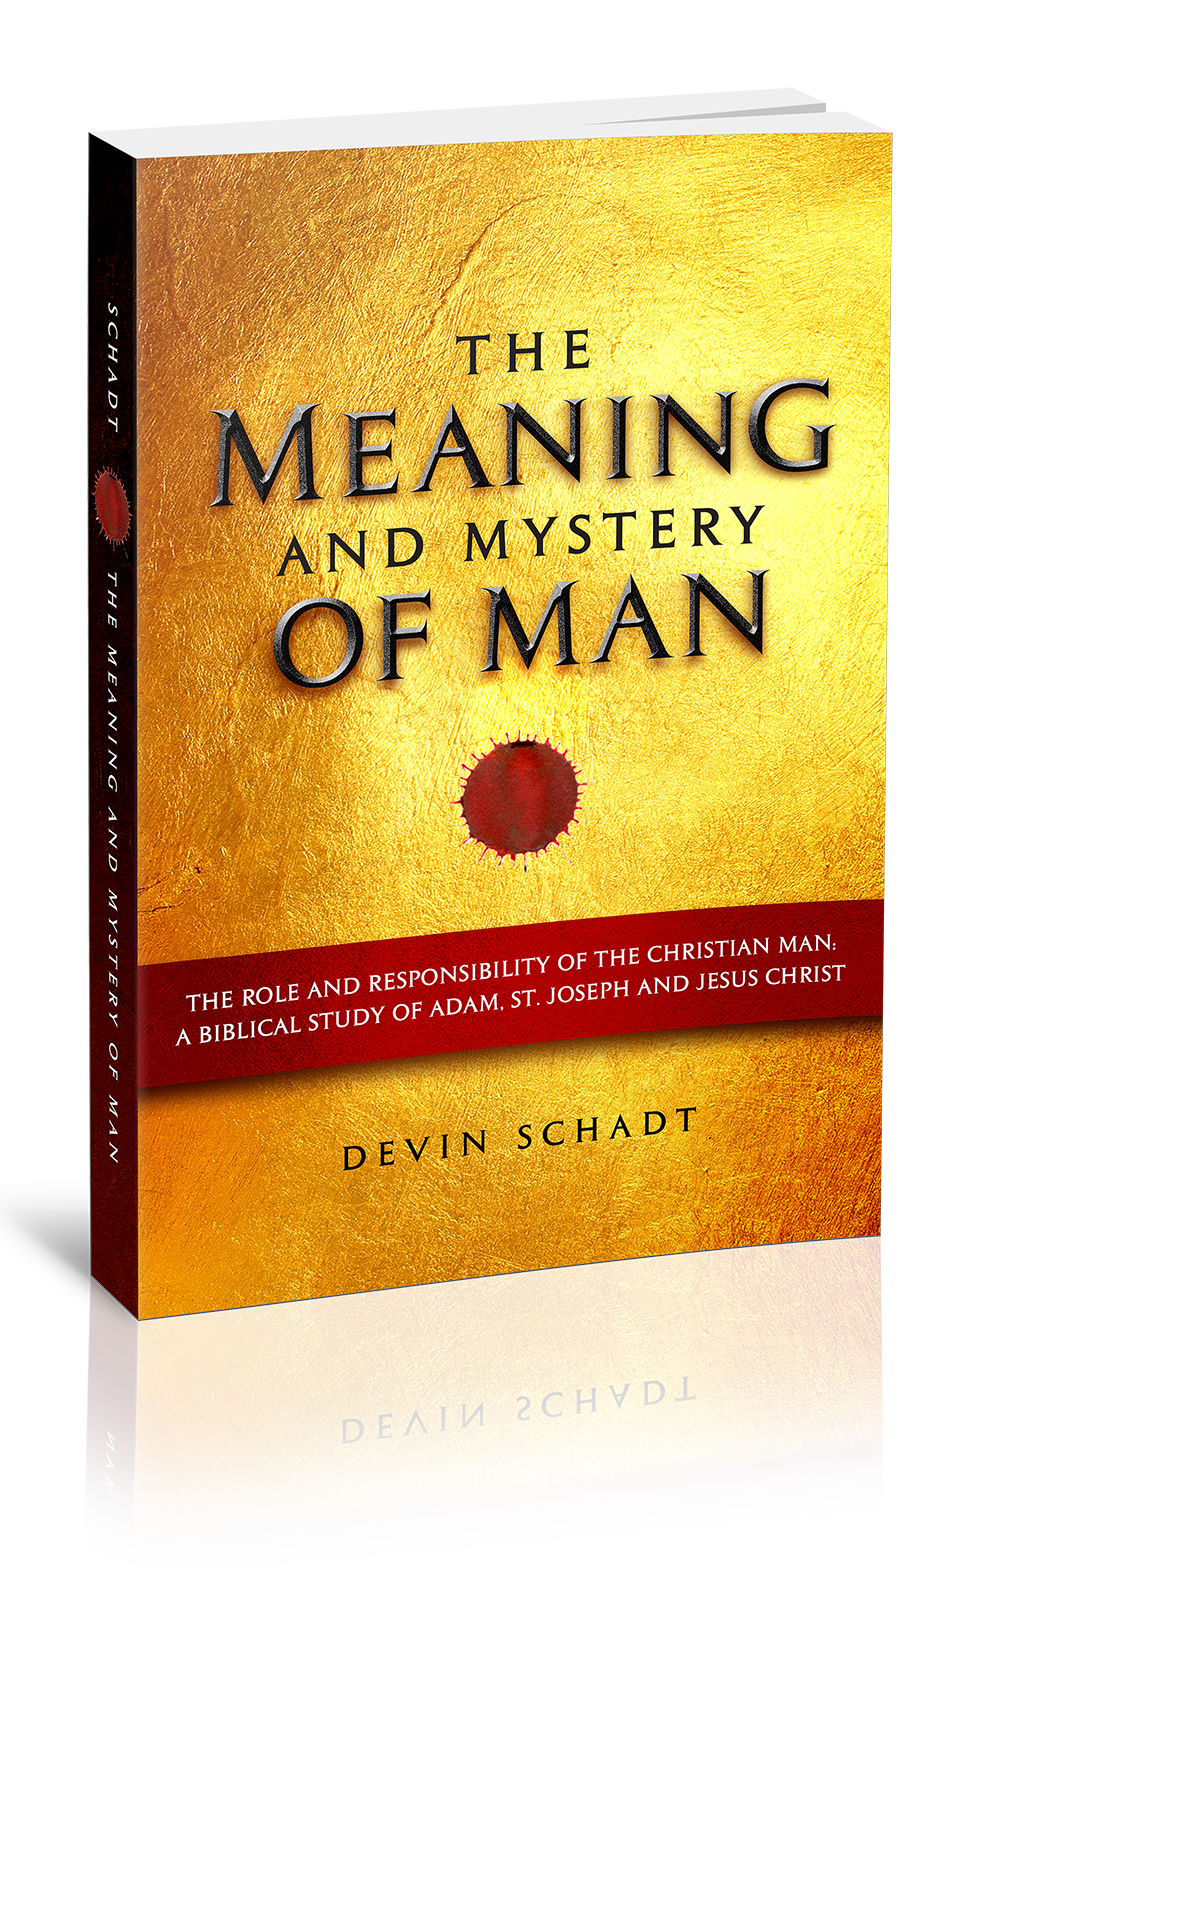 The Meaning and Mystery of Man